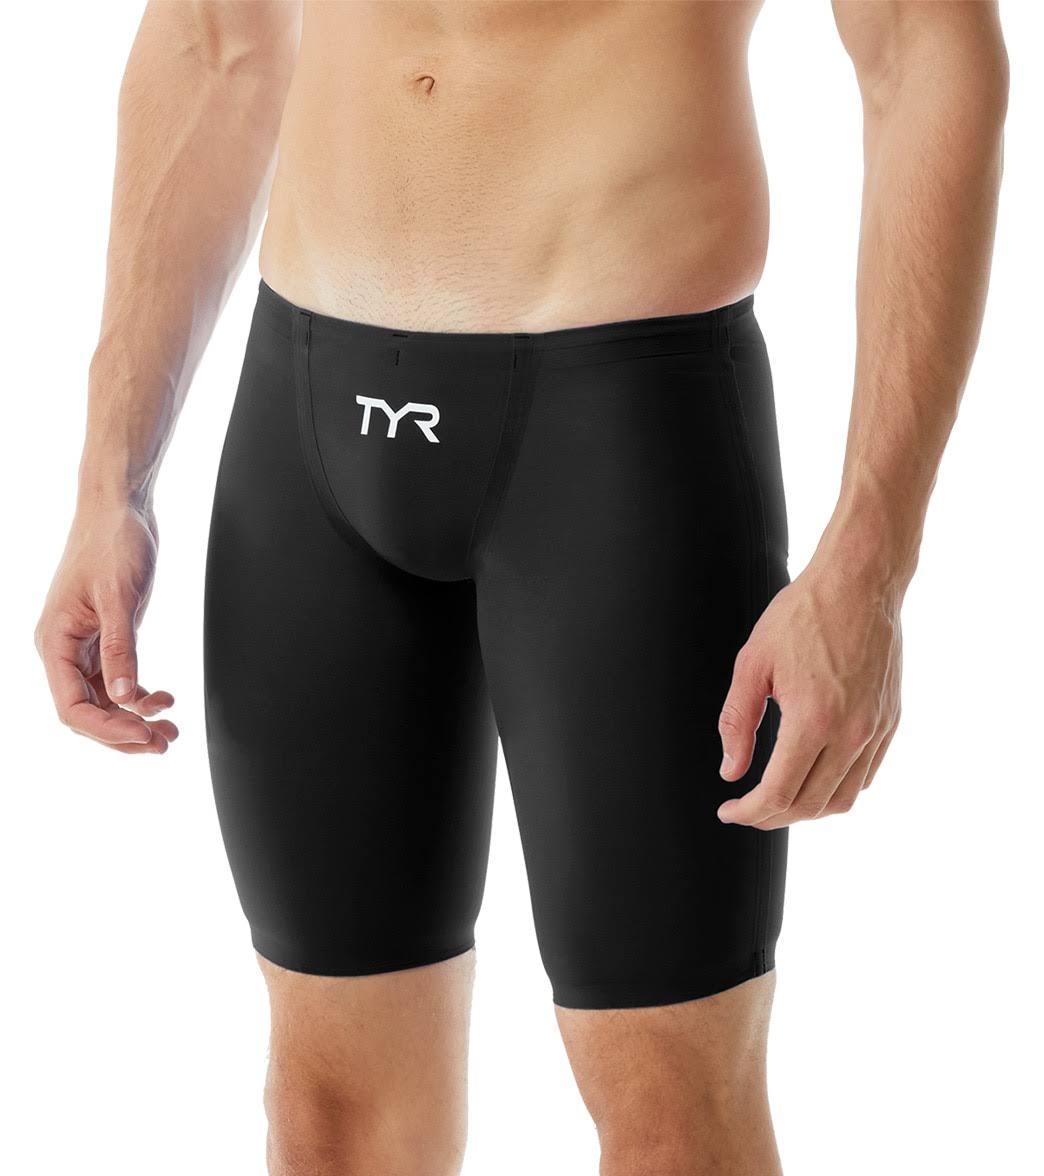 TYR Invictus Solid Jammer Black - 24